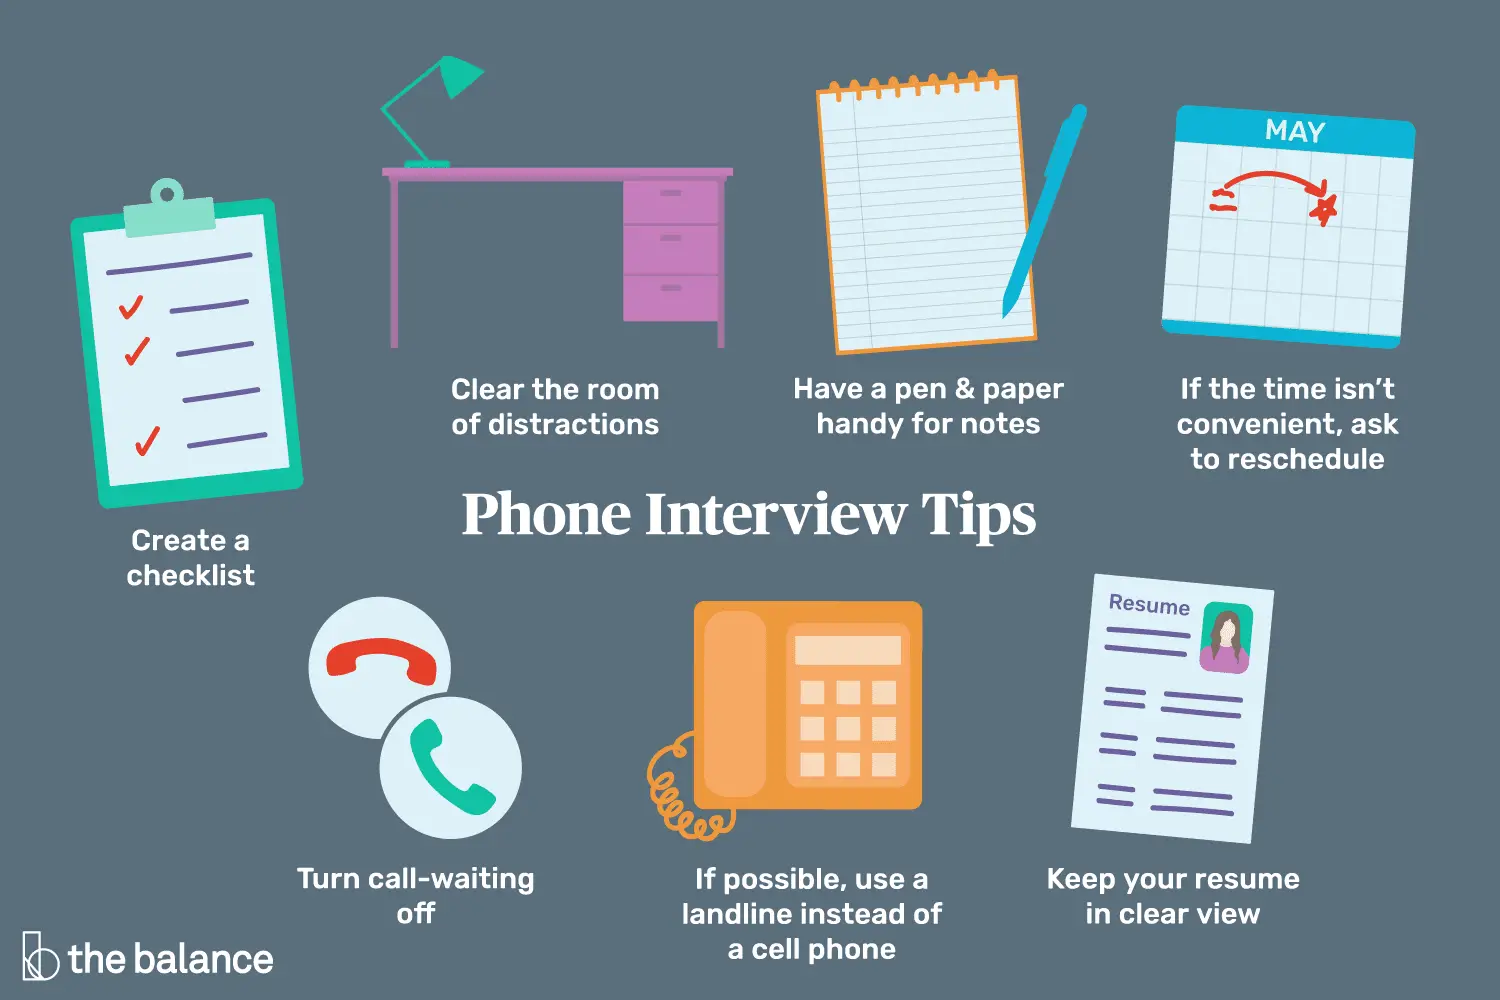 Get Some Great Phone Interview Tips